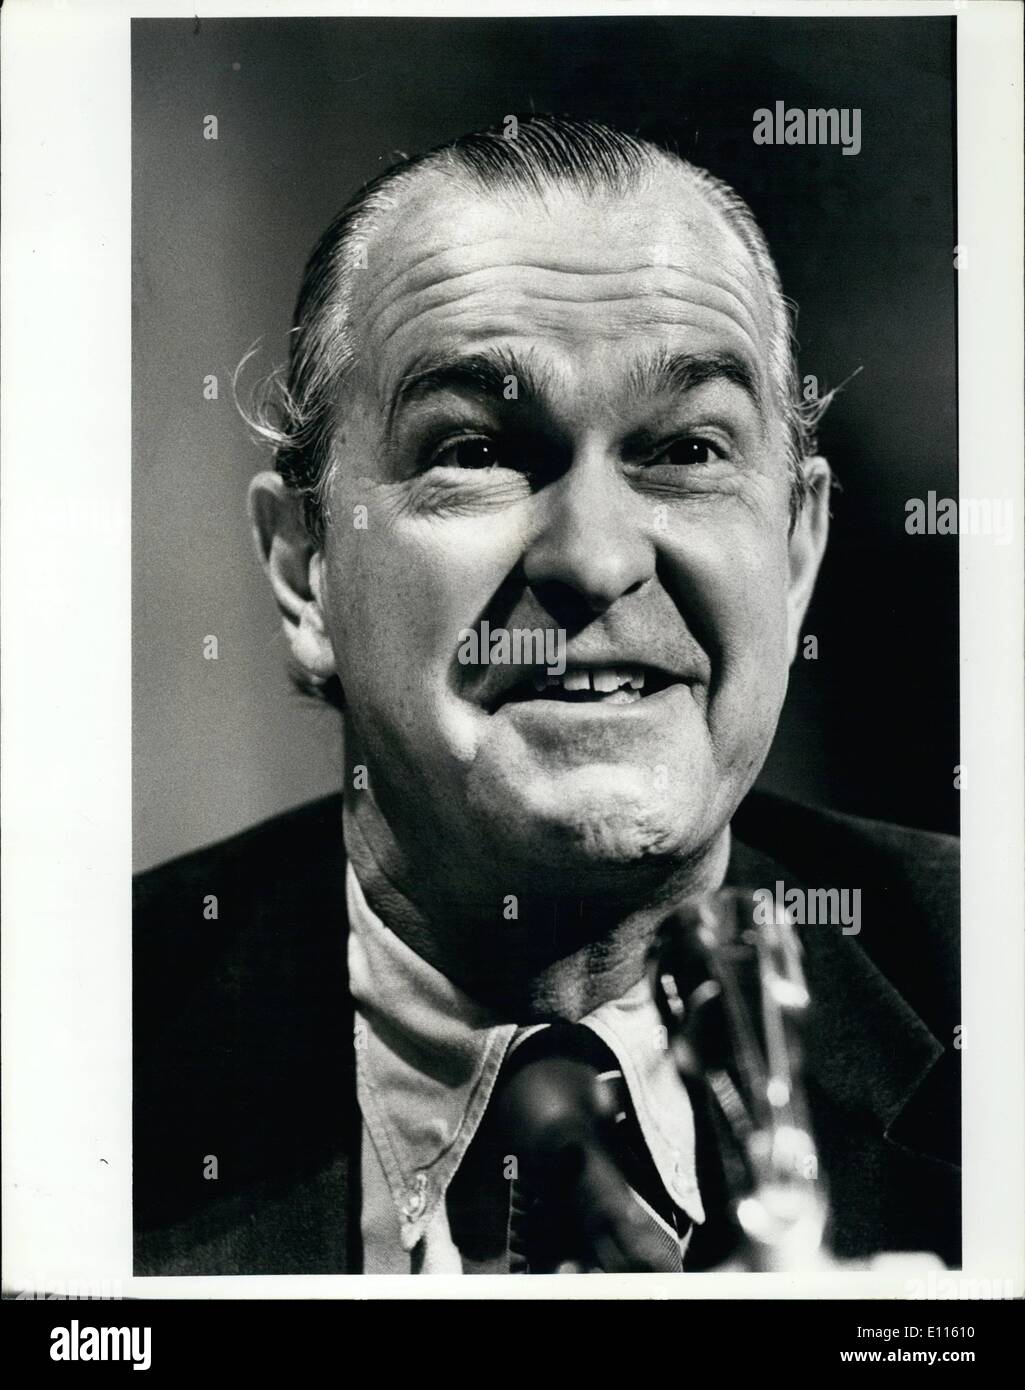 Sep. 09, 1975 - Ambassador Richard Helms, former Director of the Central  Intelligence Agency, testifying before the Senate Select Committee on  Intelligence Stock Photo - Alamy